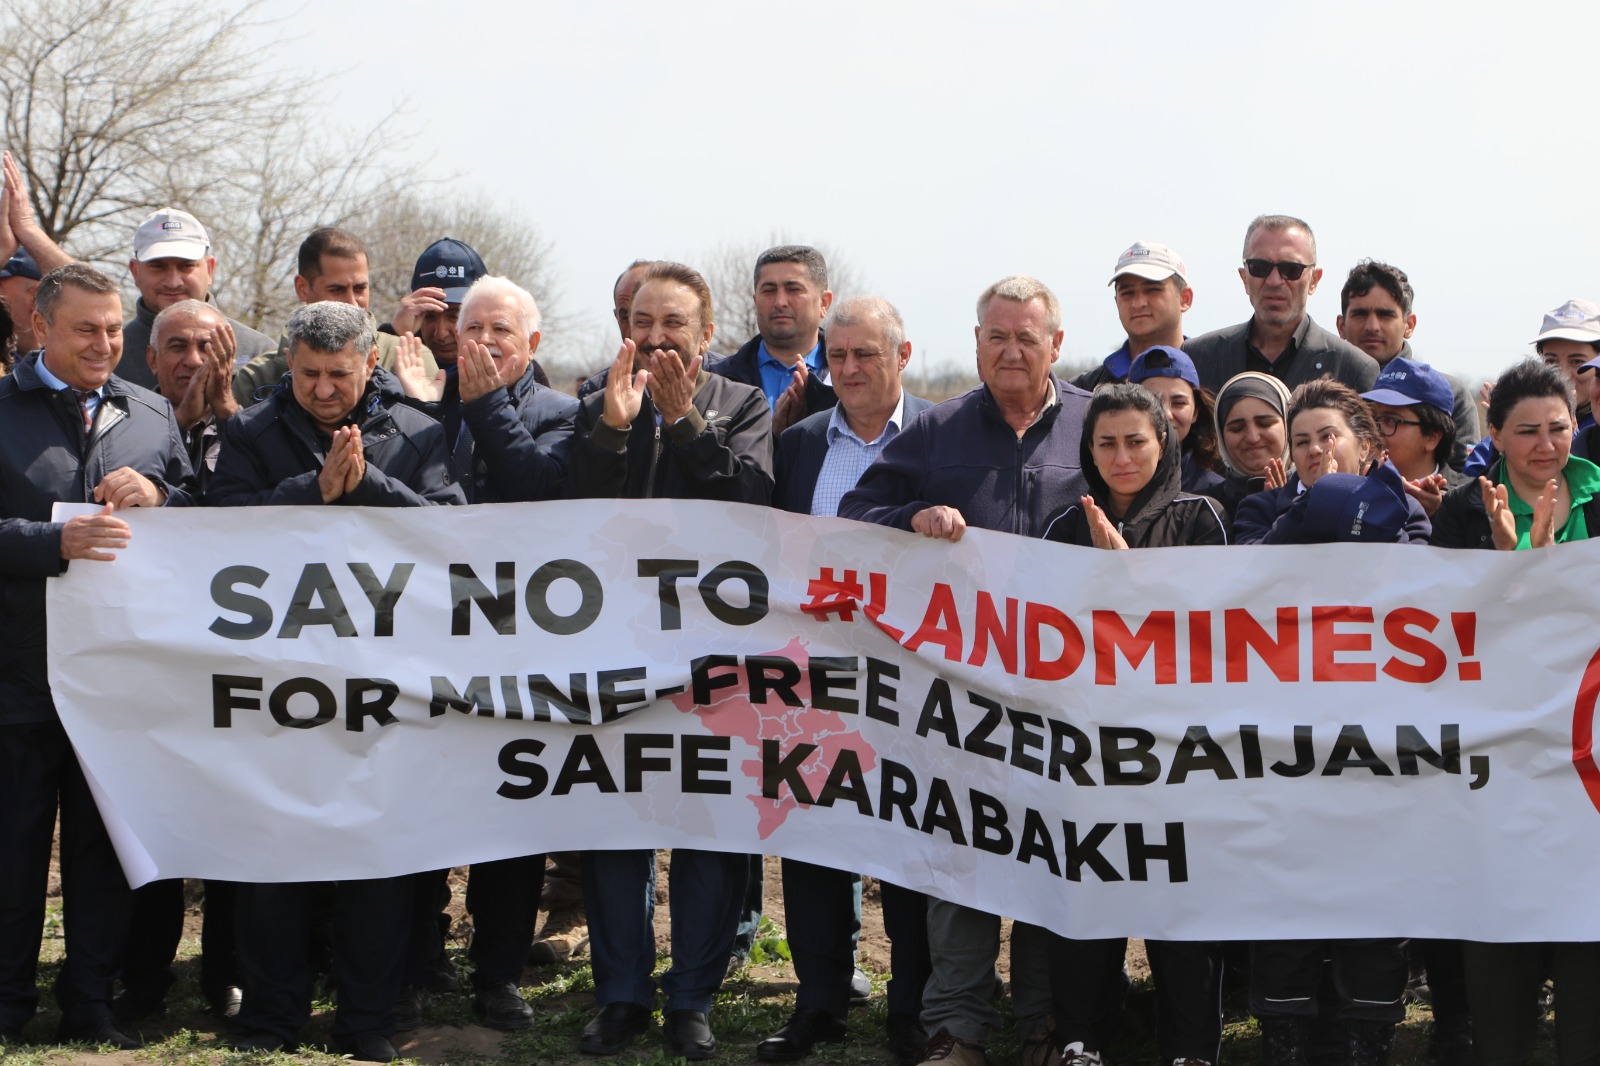 A tree-planting initiative took place in Karabakh to observe Mine Awareness Day - PHOTOS